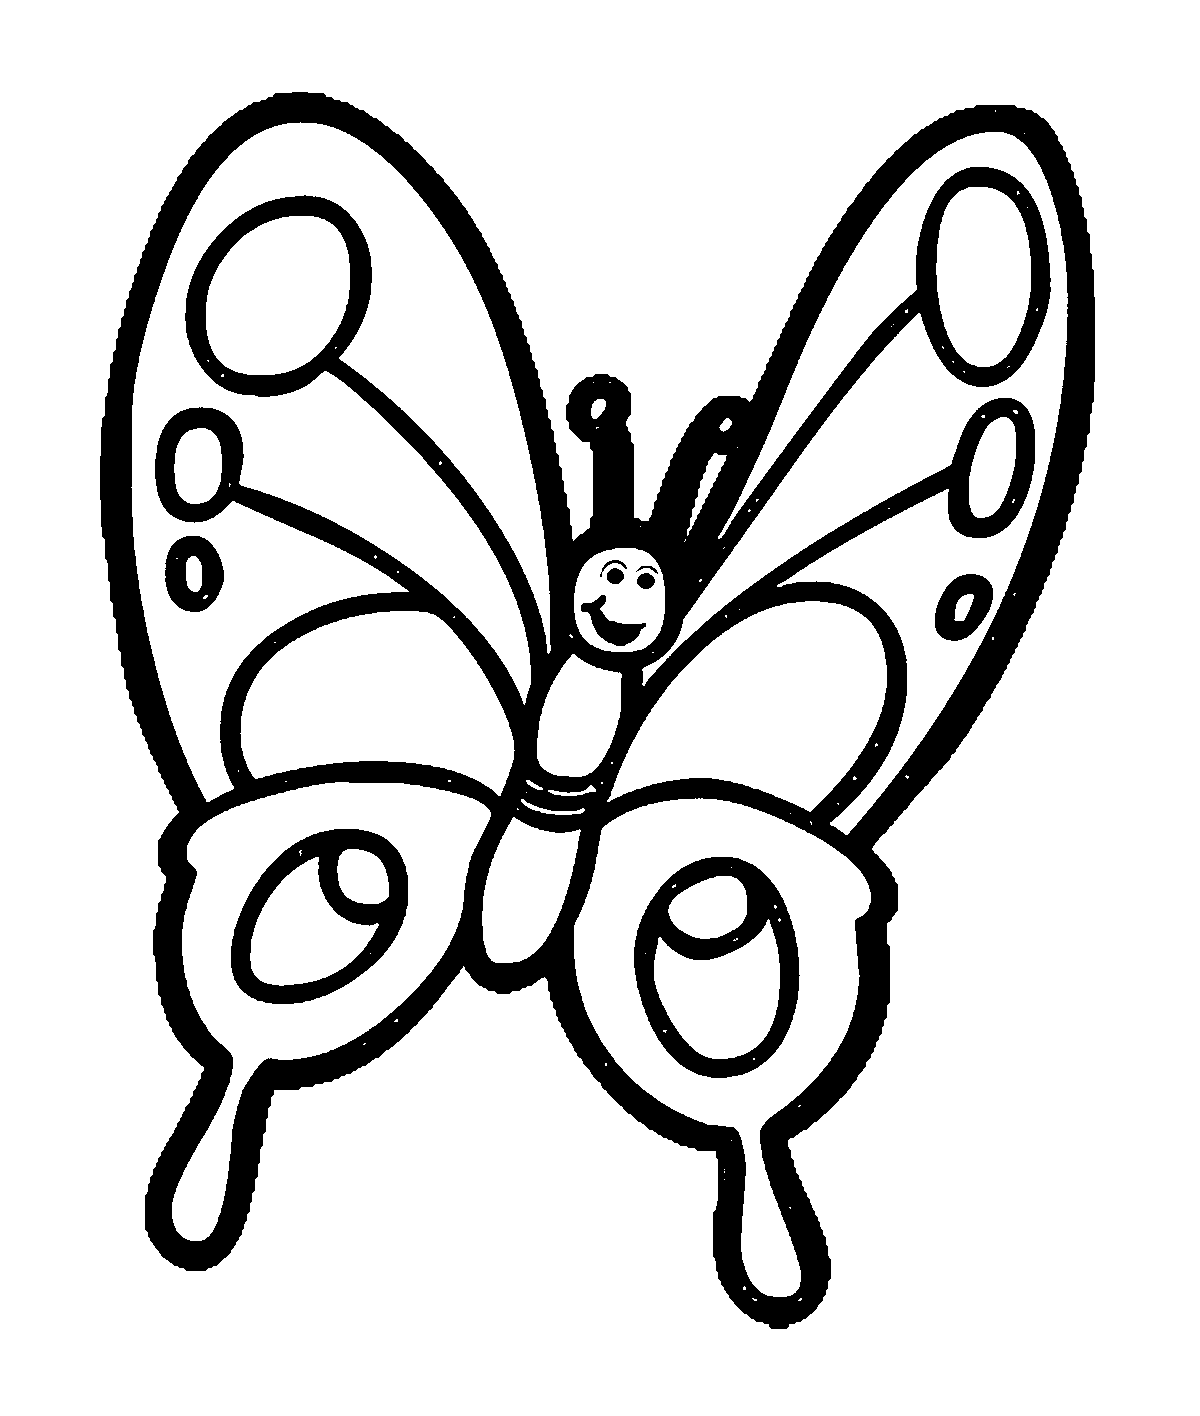 Butterfly drawing at getdrawings. Wing clipart black and white